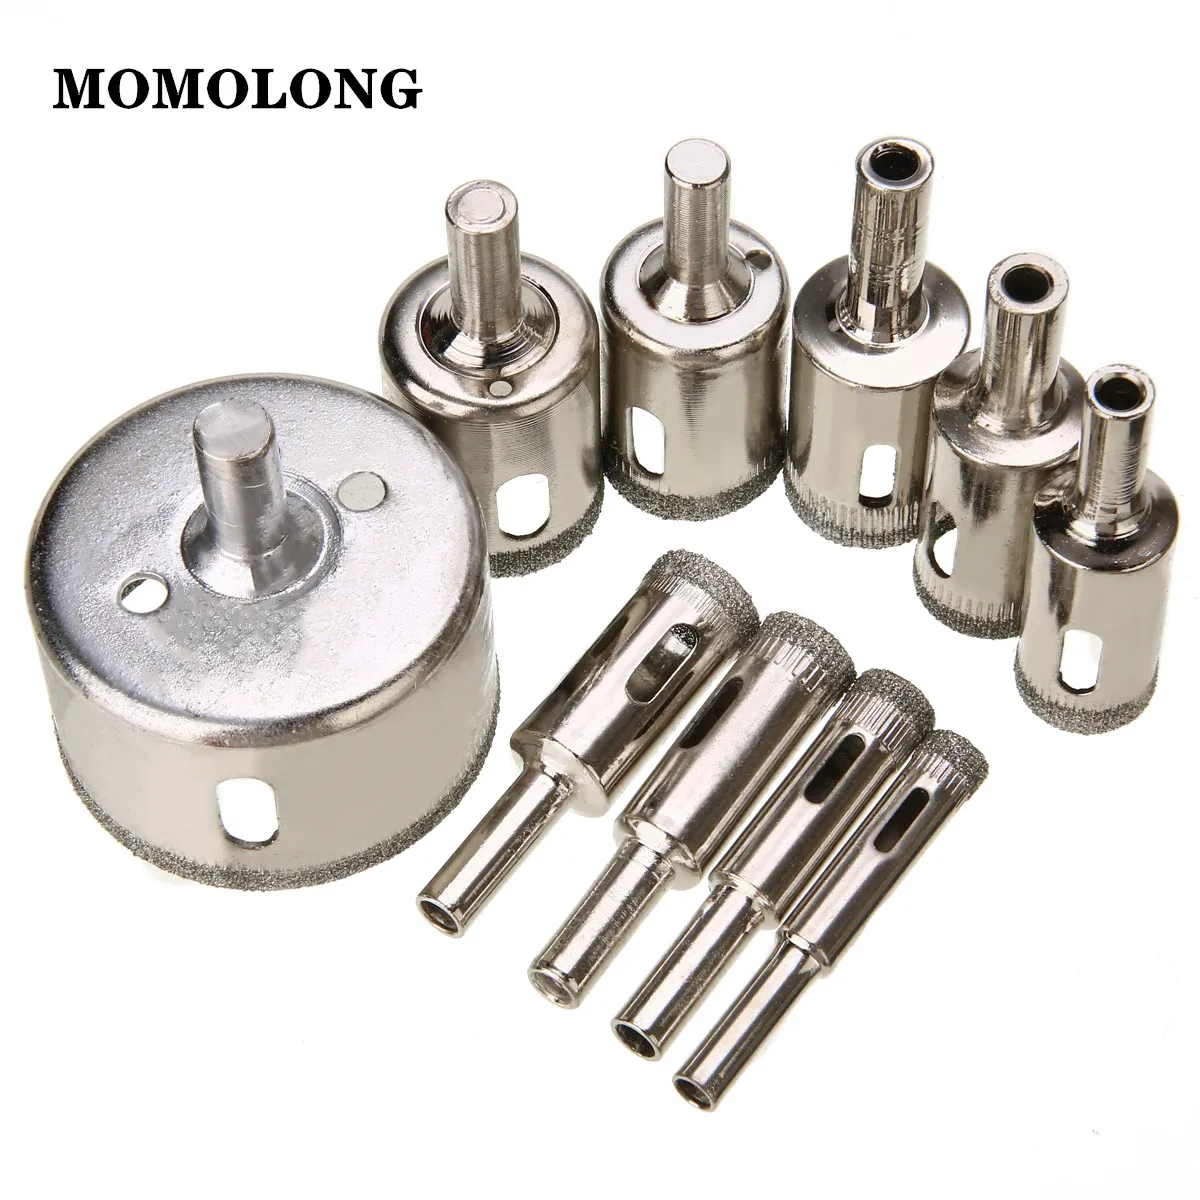 10/15/30Pcs Diamond Coated Drill Bit  Glass Ceramic Hole Saw  3-50mm Drilling Bits For Tile Marble Glass Ceramic For Power Tools 6 30mm 10pcs diamond coated hss drill bit set tile marble glass ceramic hole saw open drilling bits diamond core bit power tools